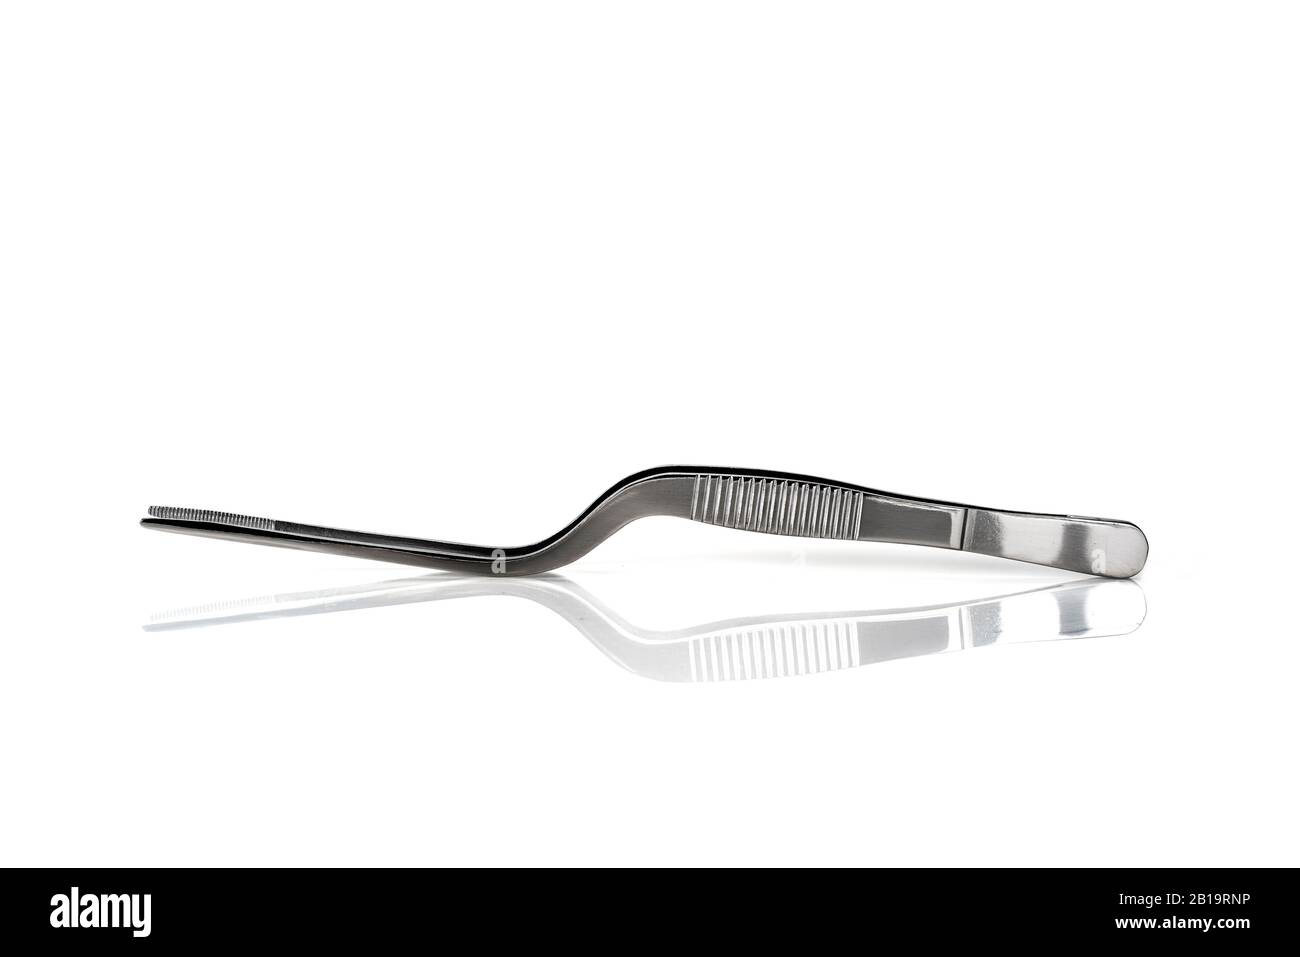 a pair of metal curved tweezers on a white background Stock Photo